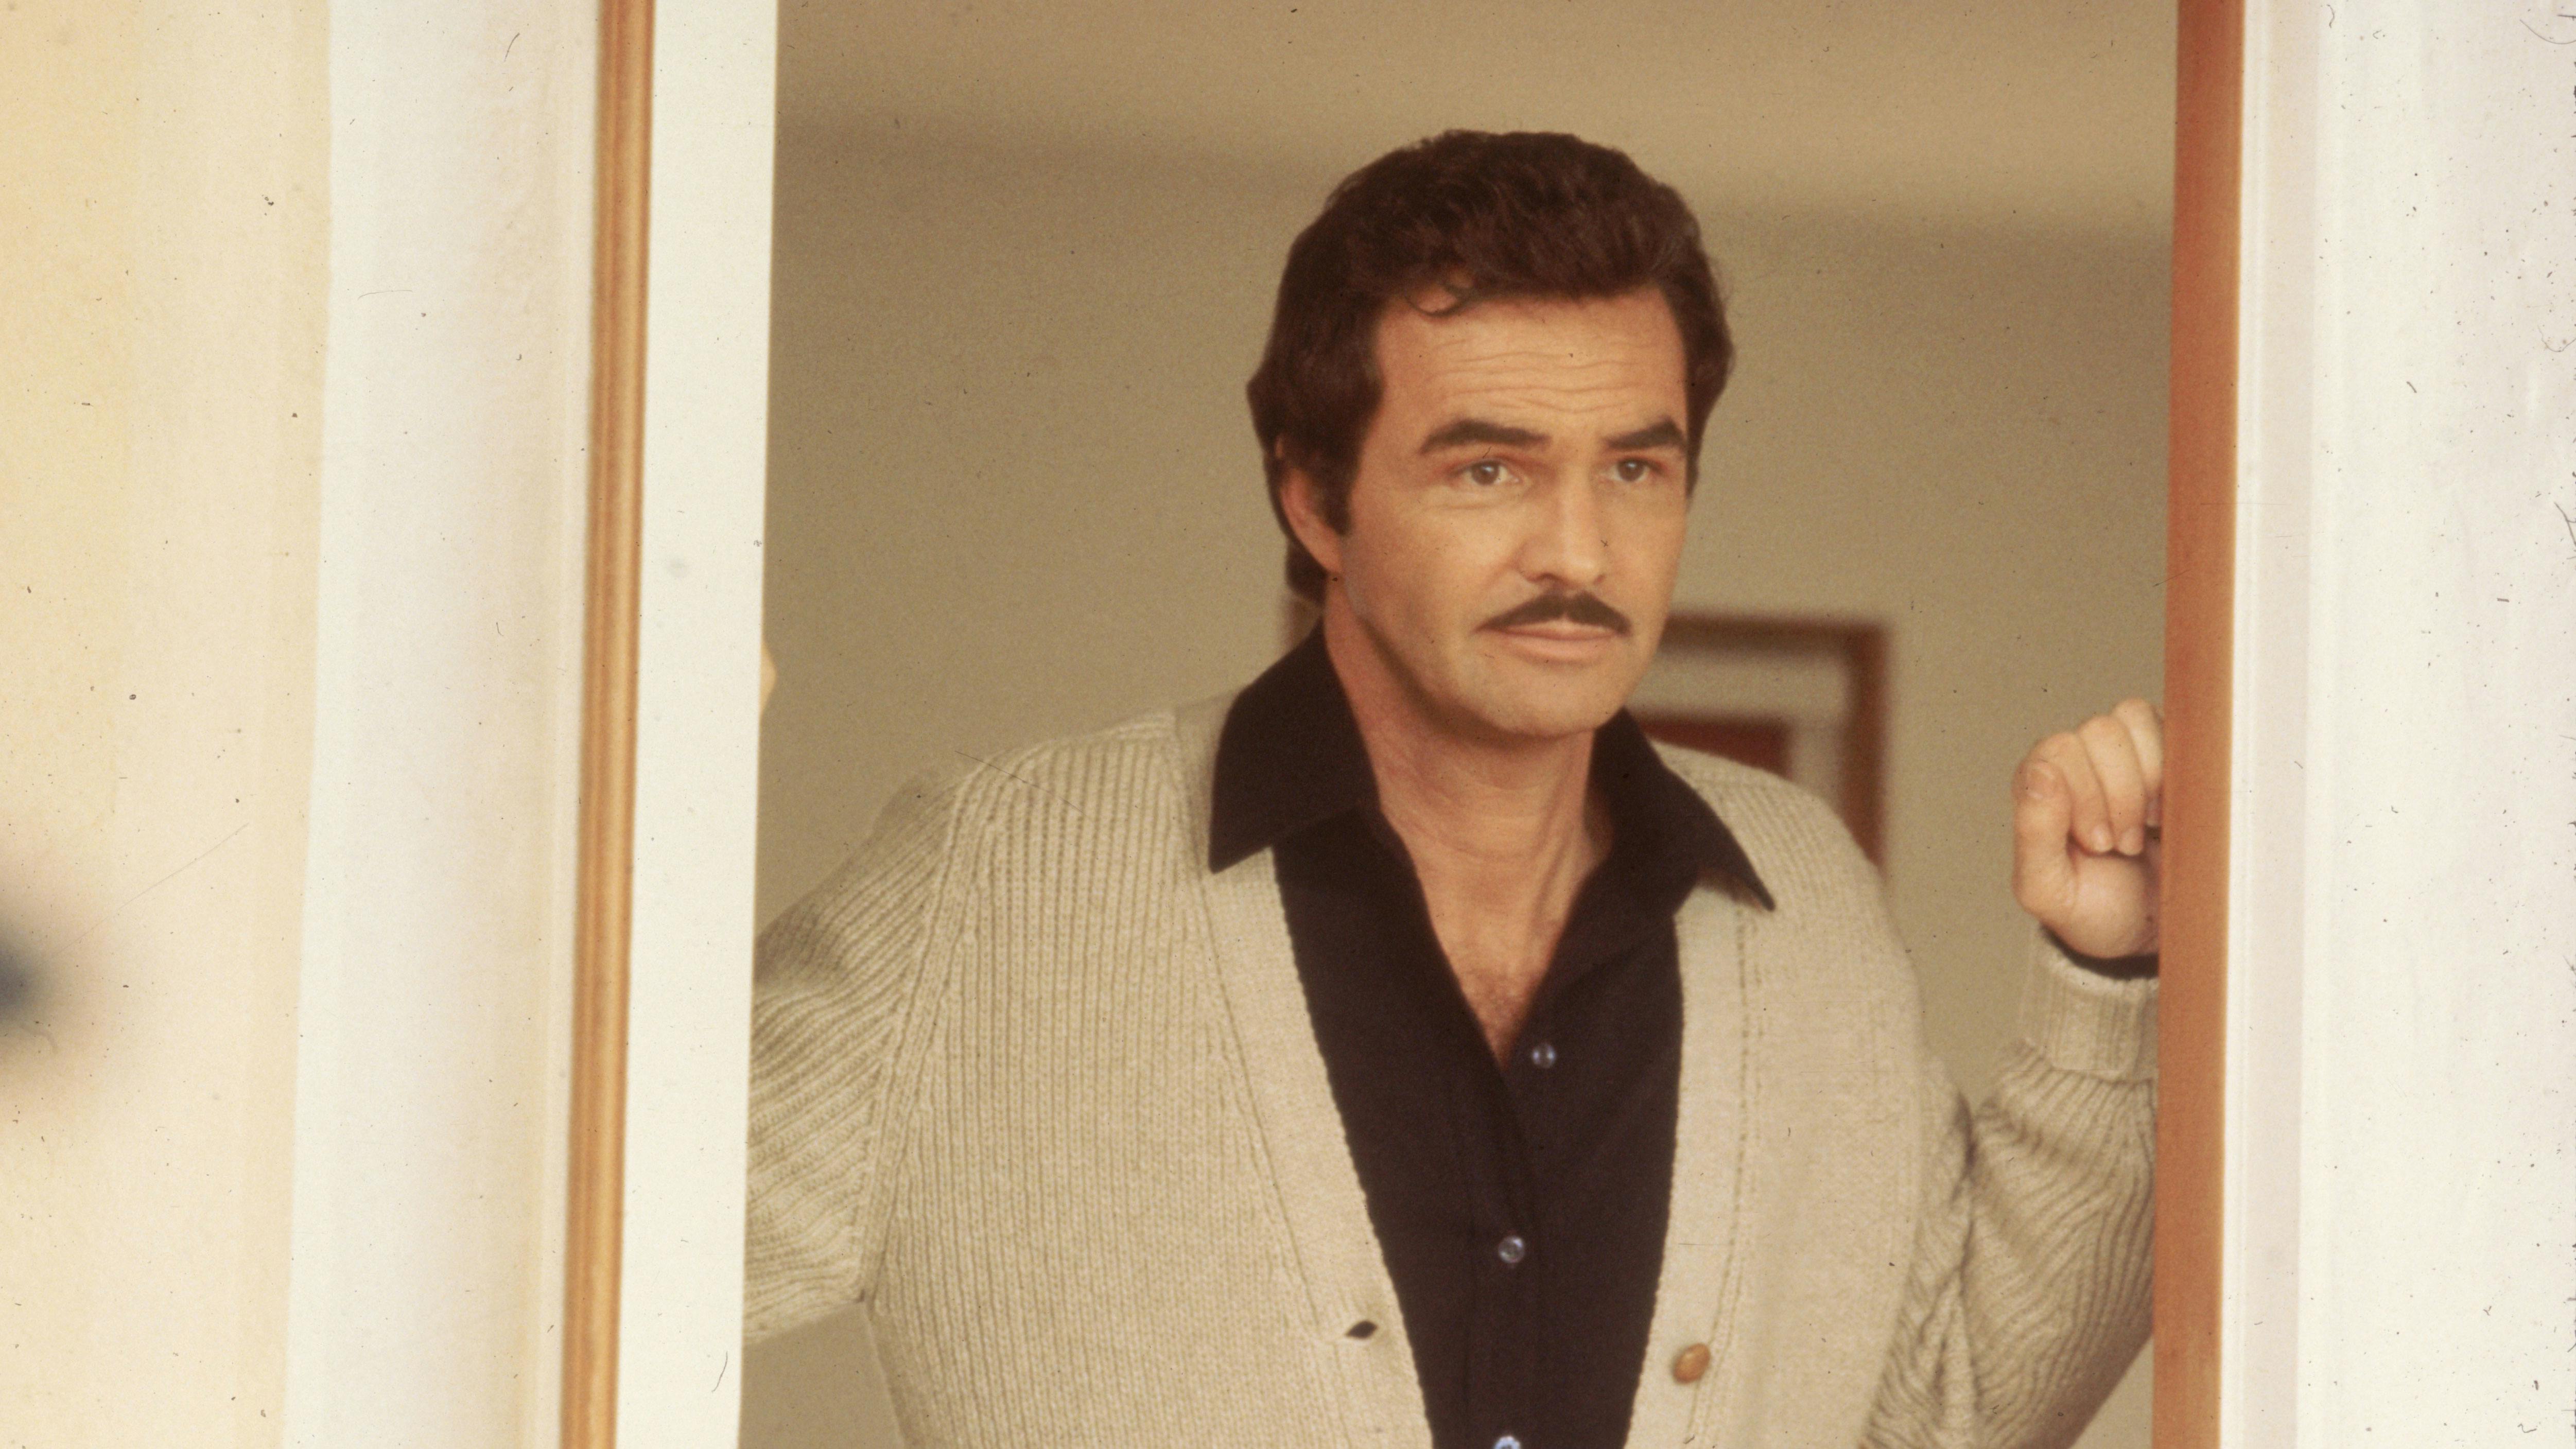 Burt Reynolds the good ol boy Movies %%channel_name%% picture